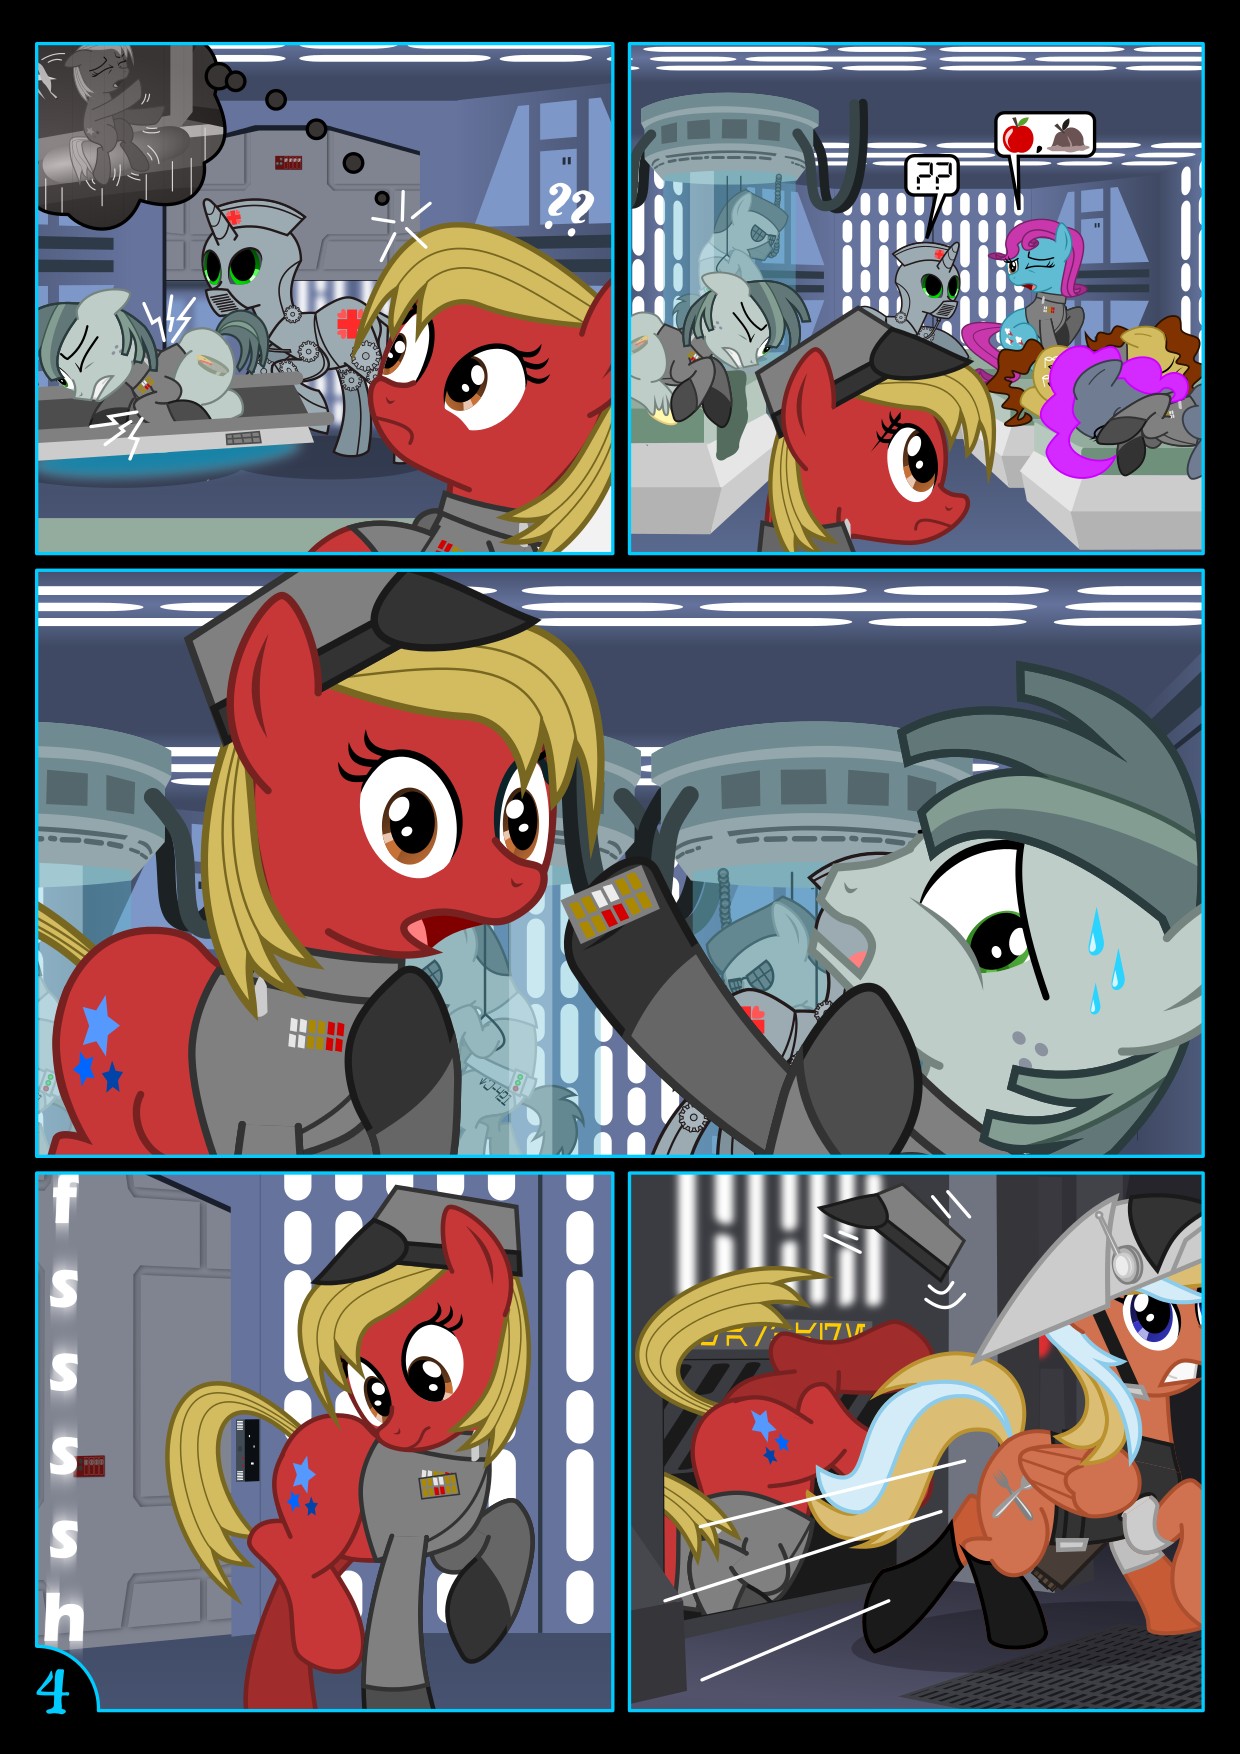 Star Mares S2.4: Bad Apples